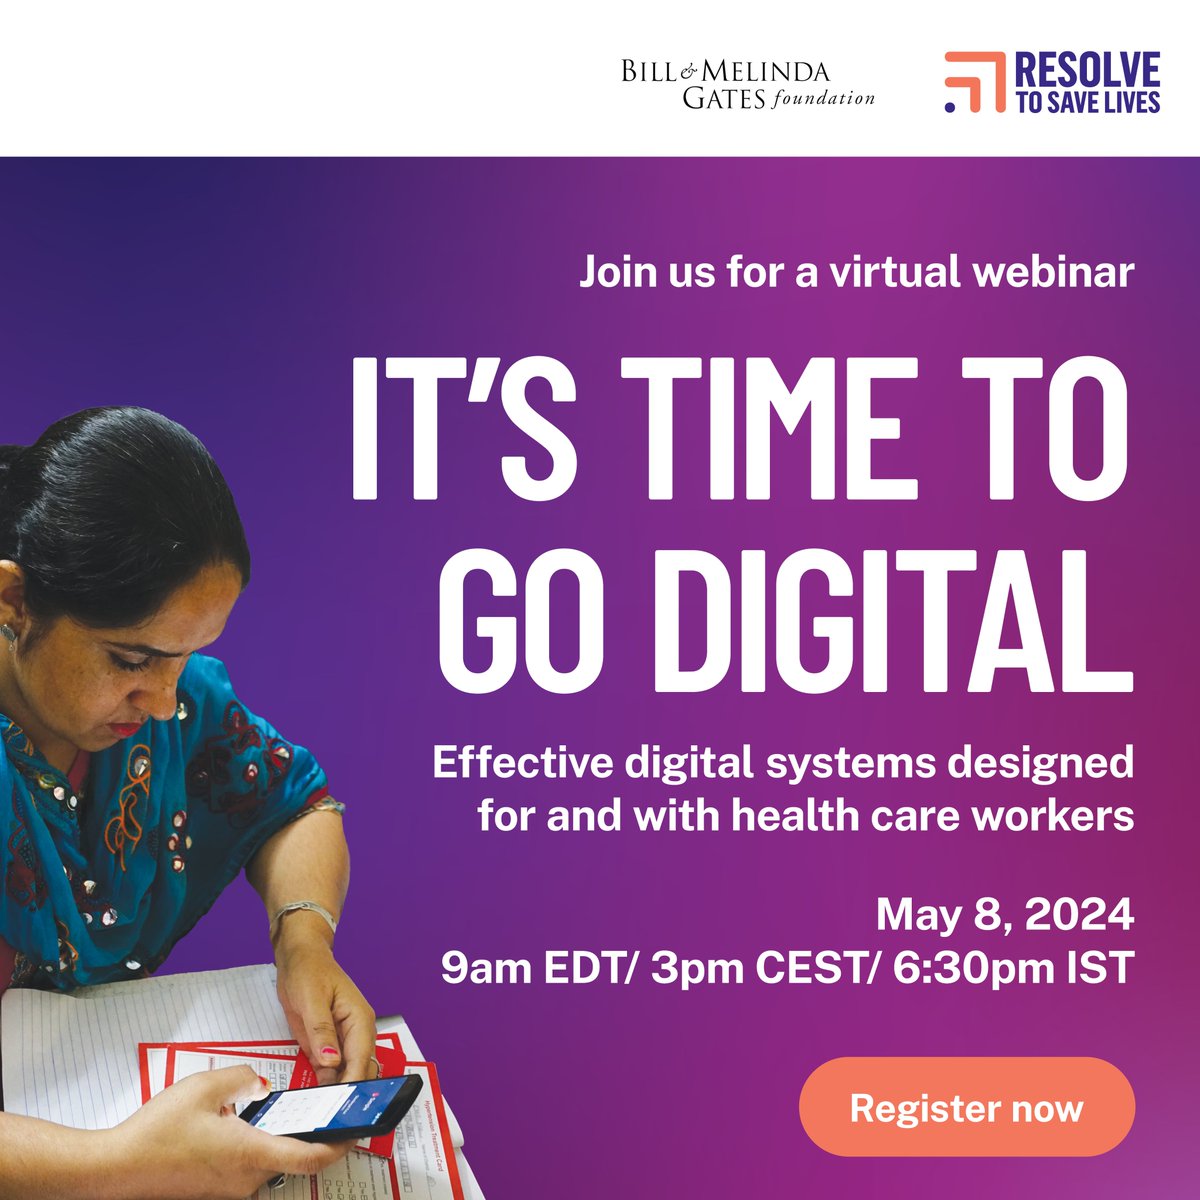 Join us May 8 for a webinar with @gatesfoundation on designing digital health tools that keep health care workers at the center. Panelists include @dburka, @drtomfrieden, @suhelbidani, @Aartitoday, @alabriqu, @Shelaghjoyce, and Marelize Gorgens. RSVP: bit.ly/49rO7cV